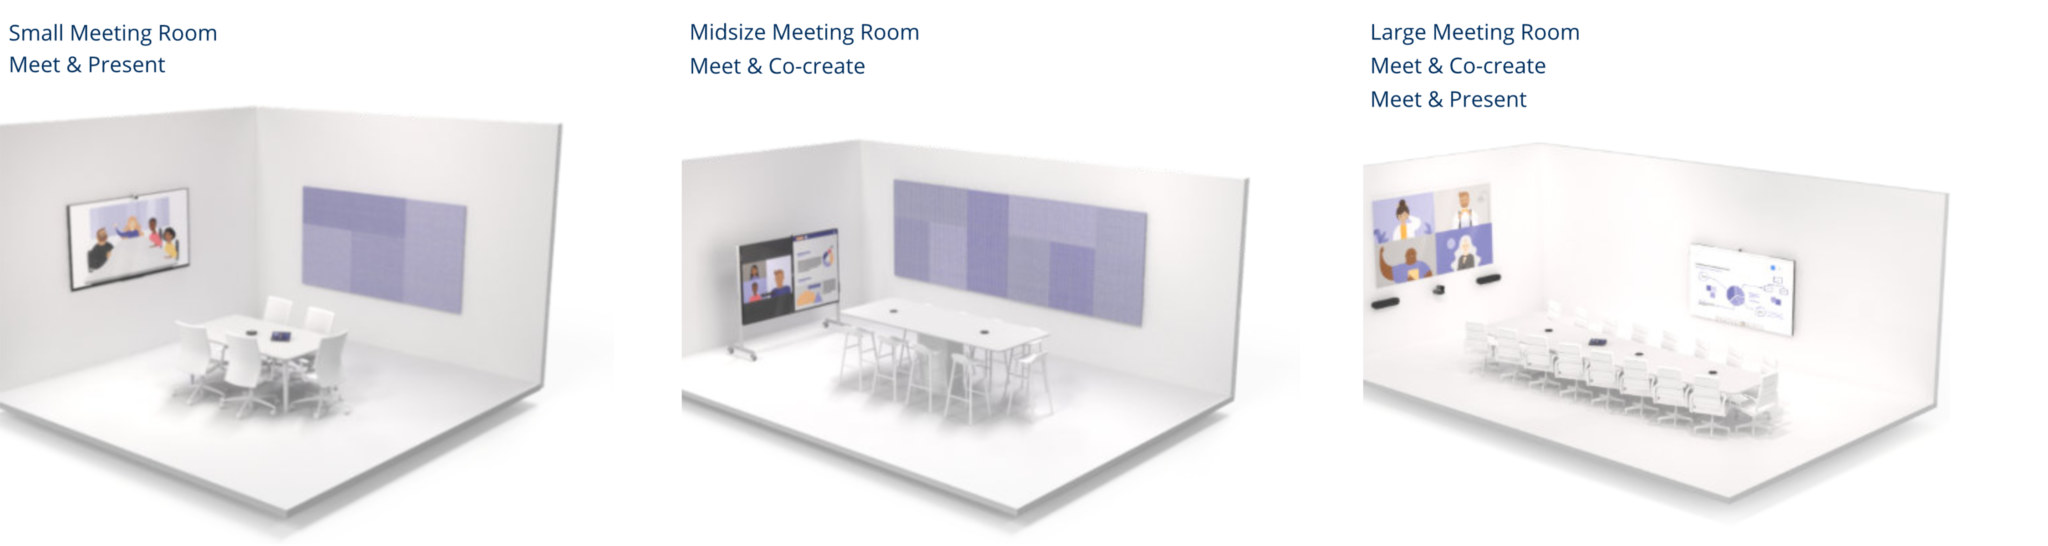 Meeting Room Examples